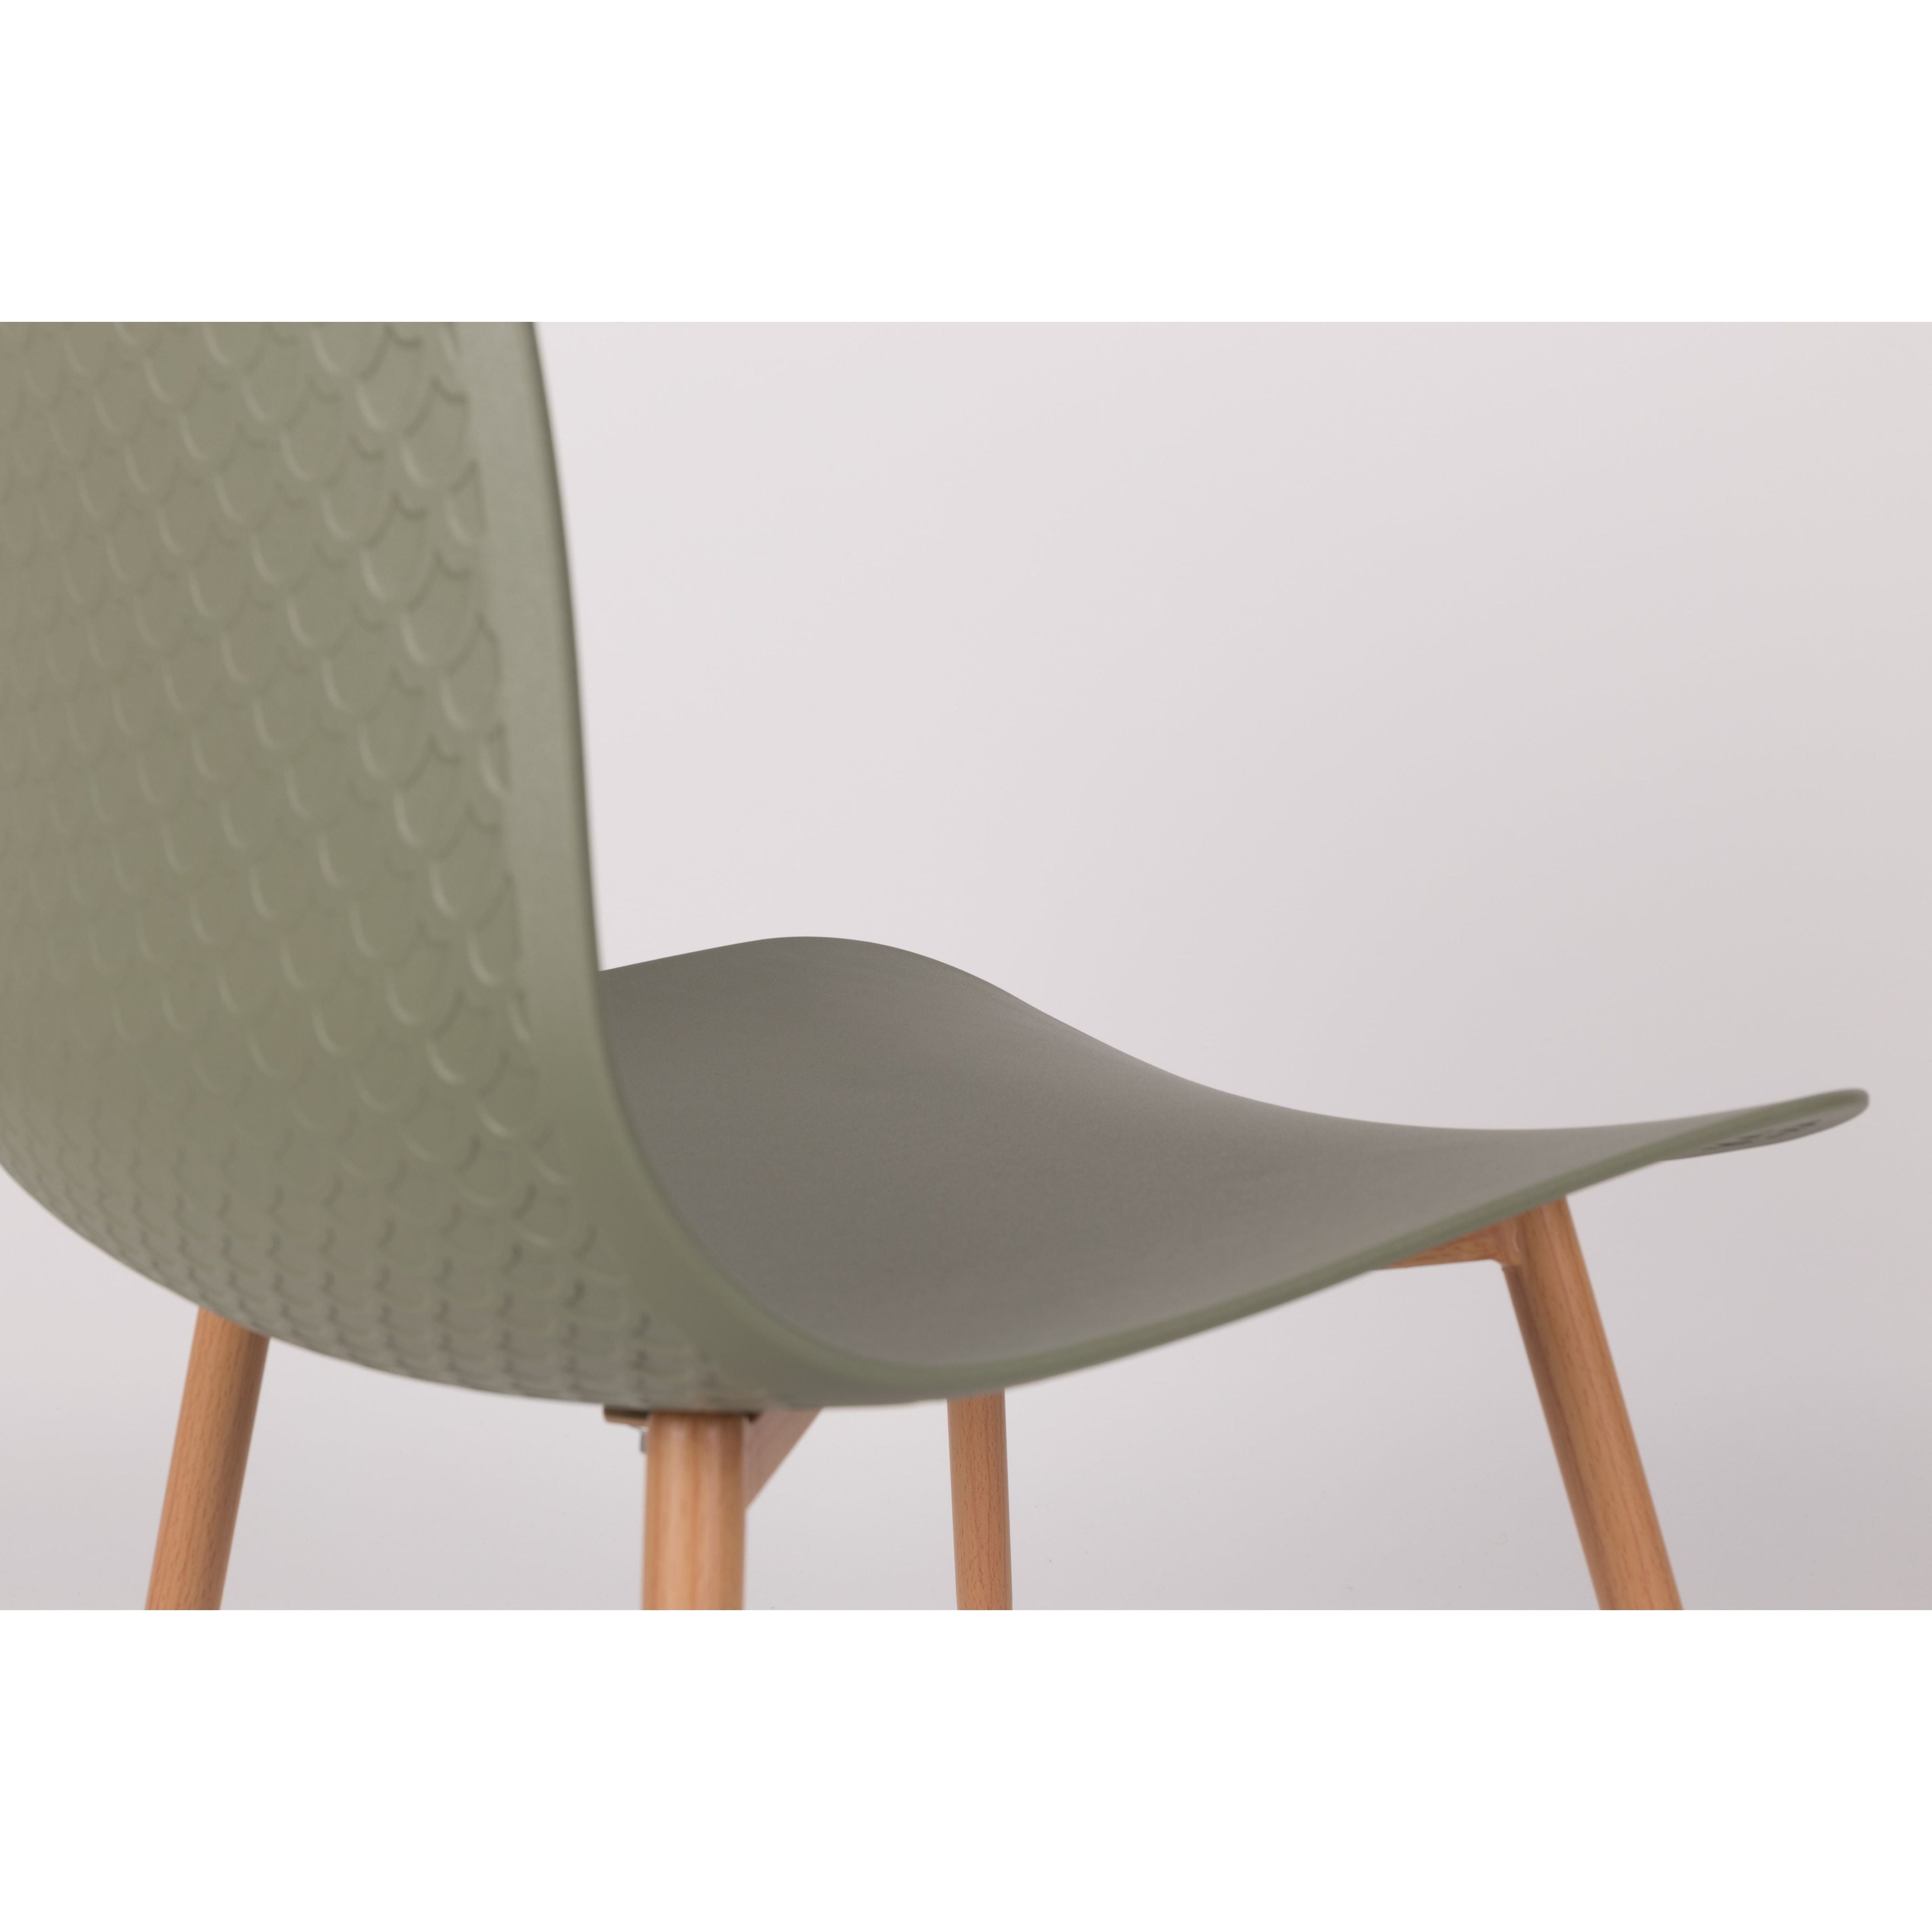 Chair leon green | 2 pieces